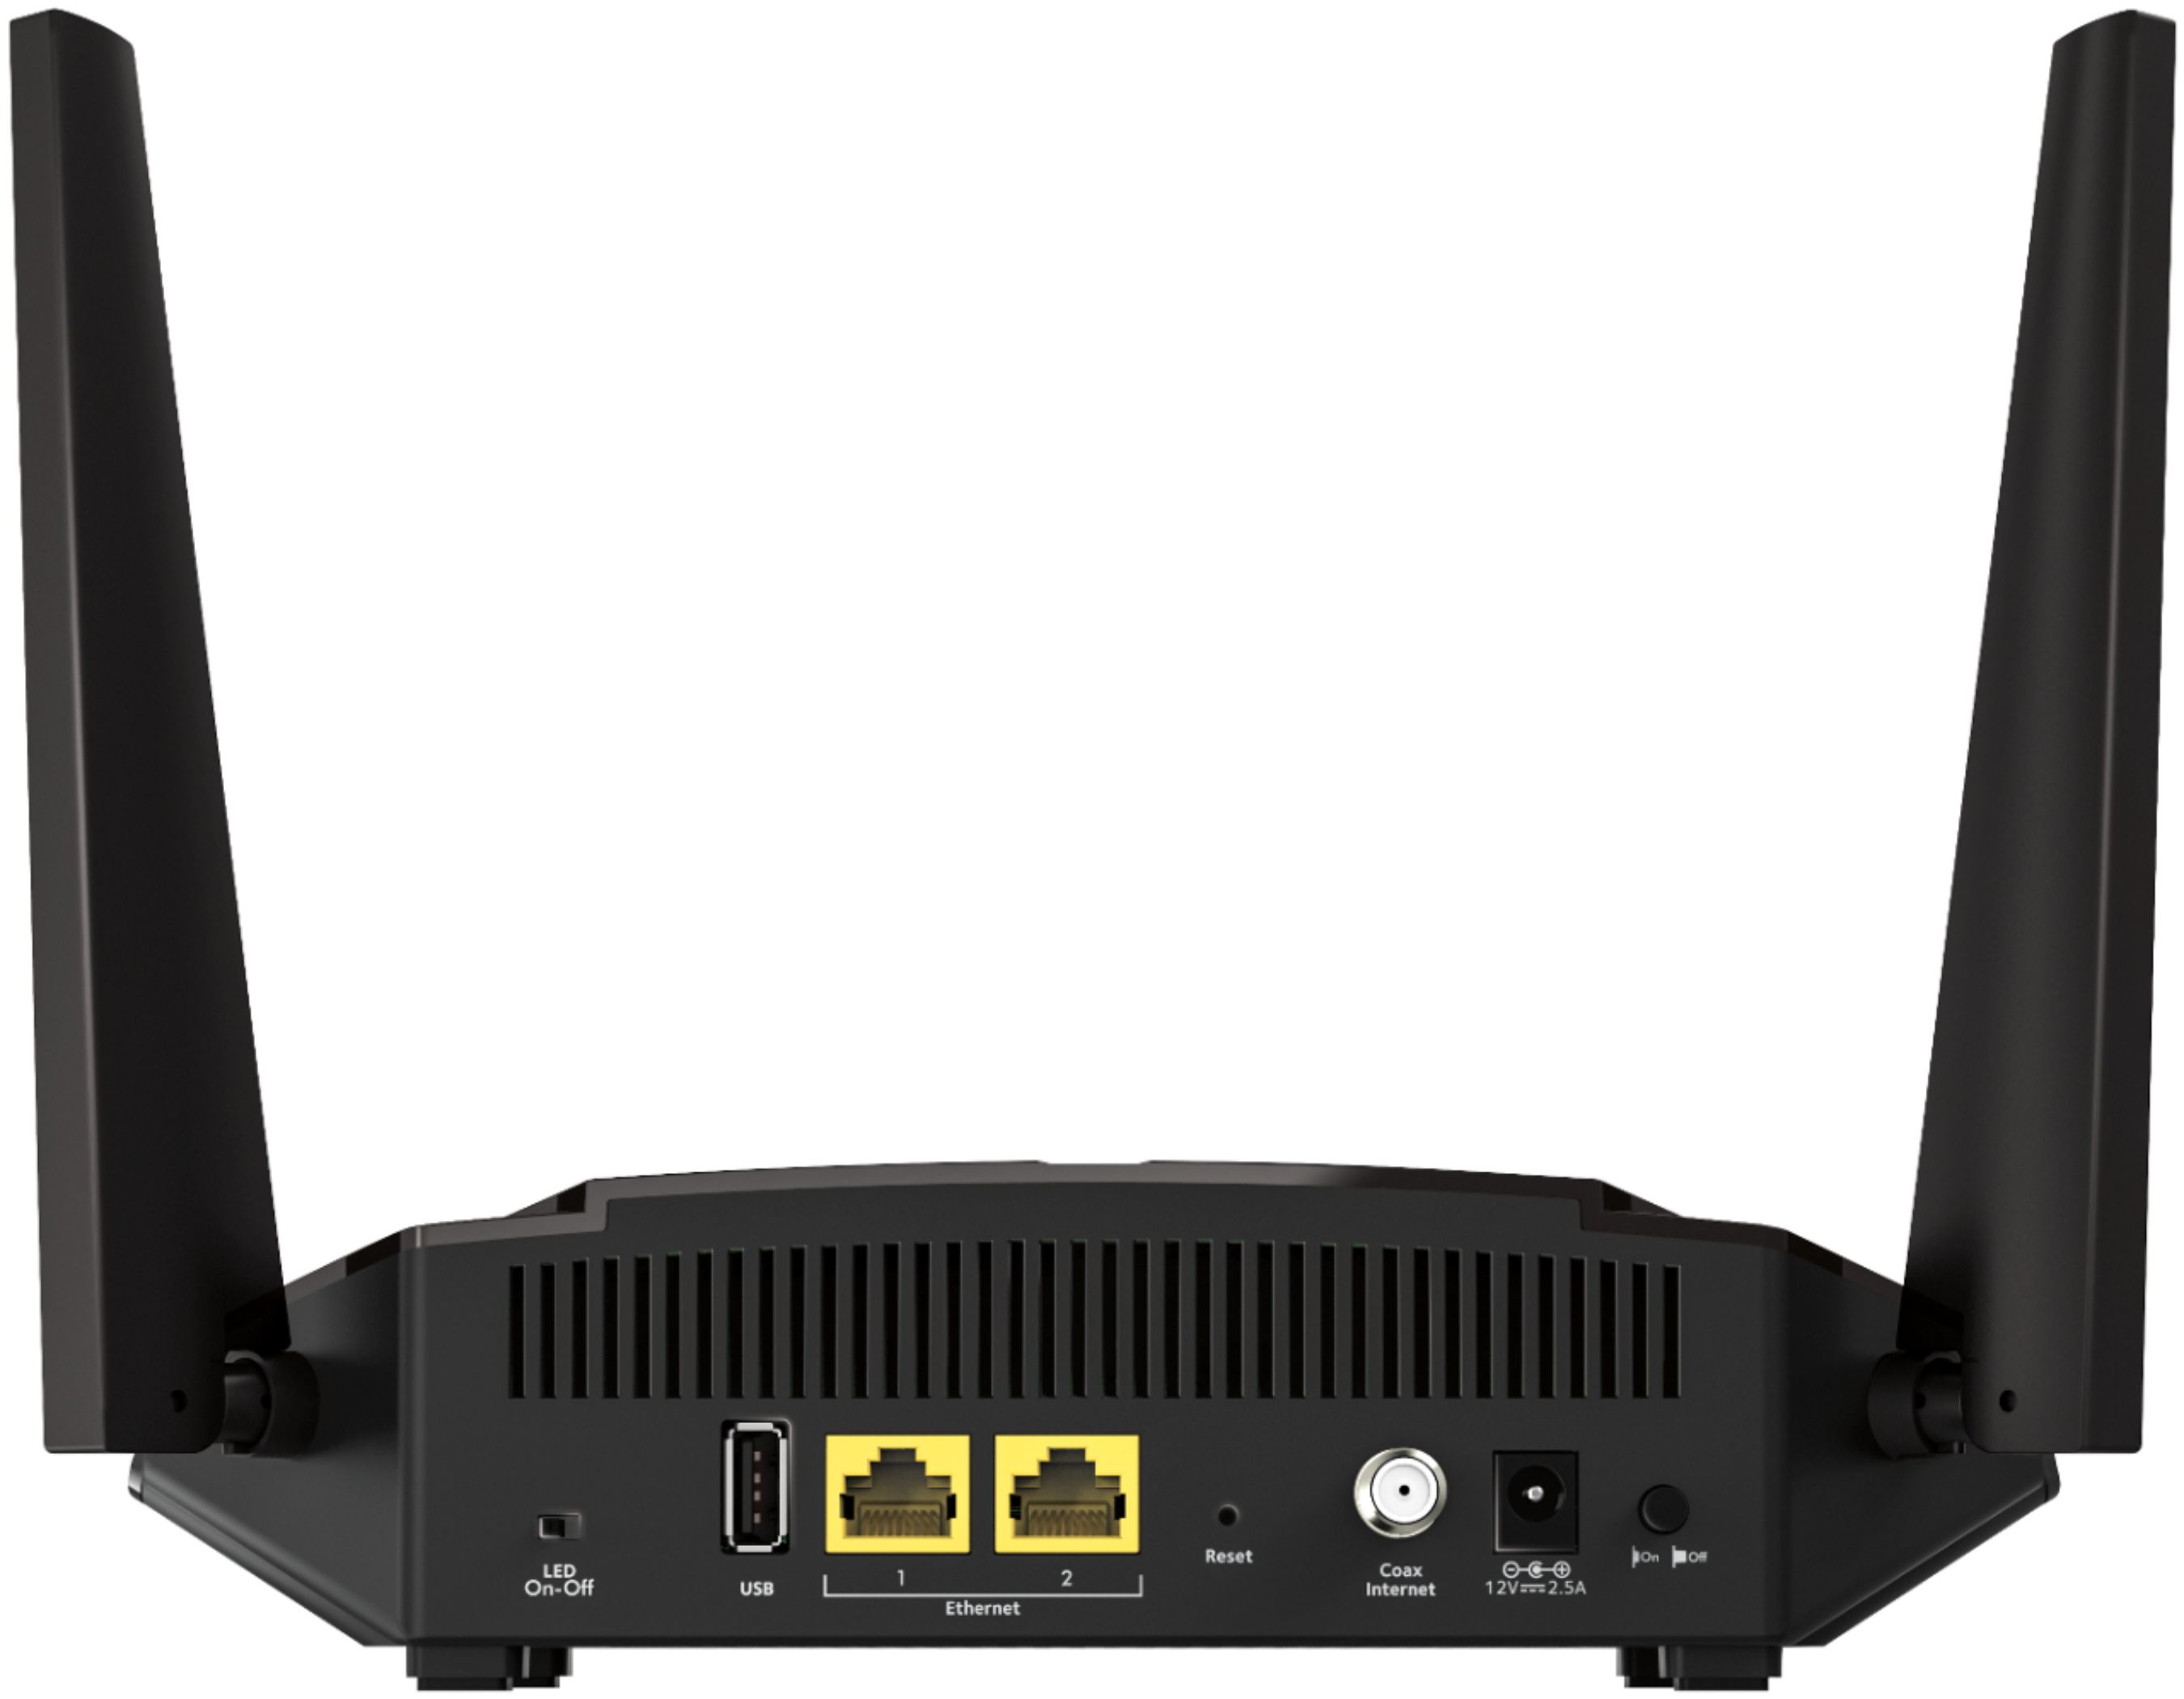 NETGEAR Dual-Band AC1200 Router with 8 x 4 DOCSIS 3.0 Cable Modem ...